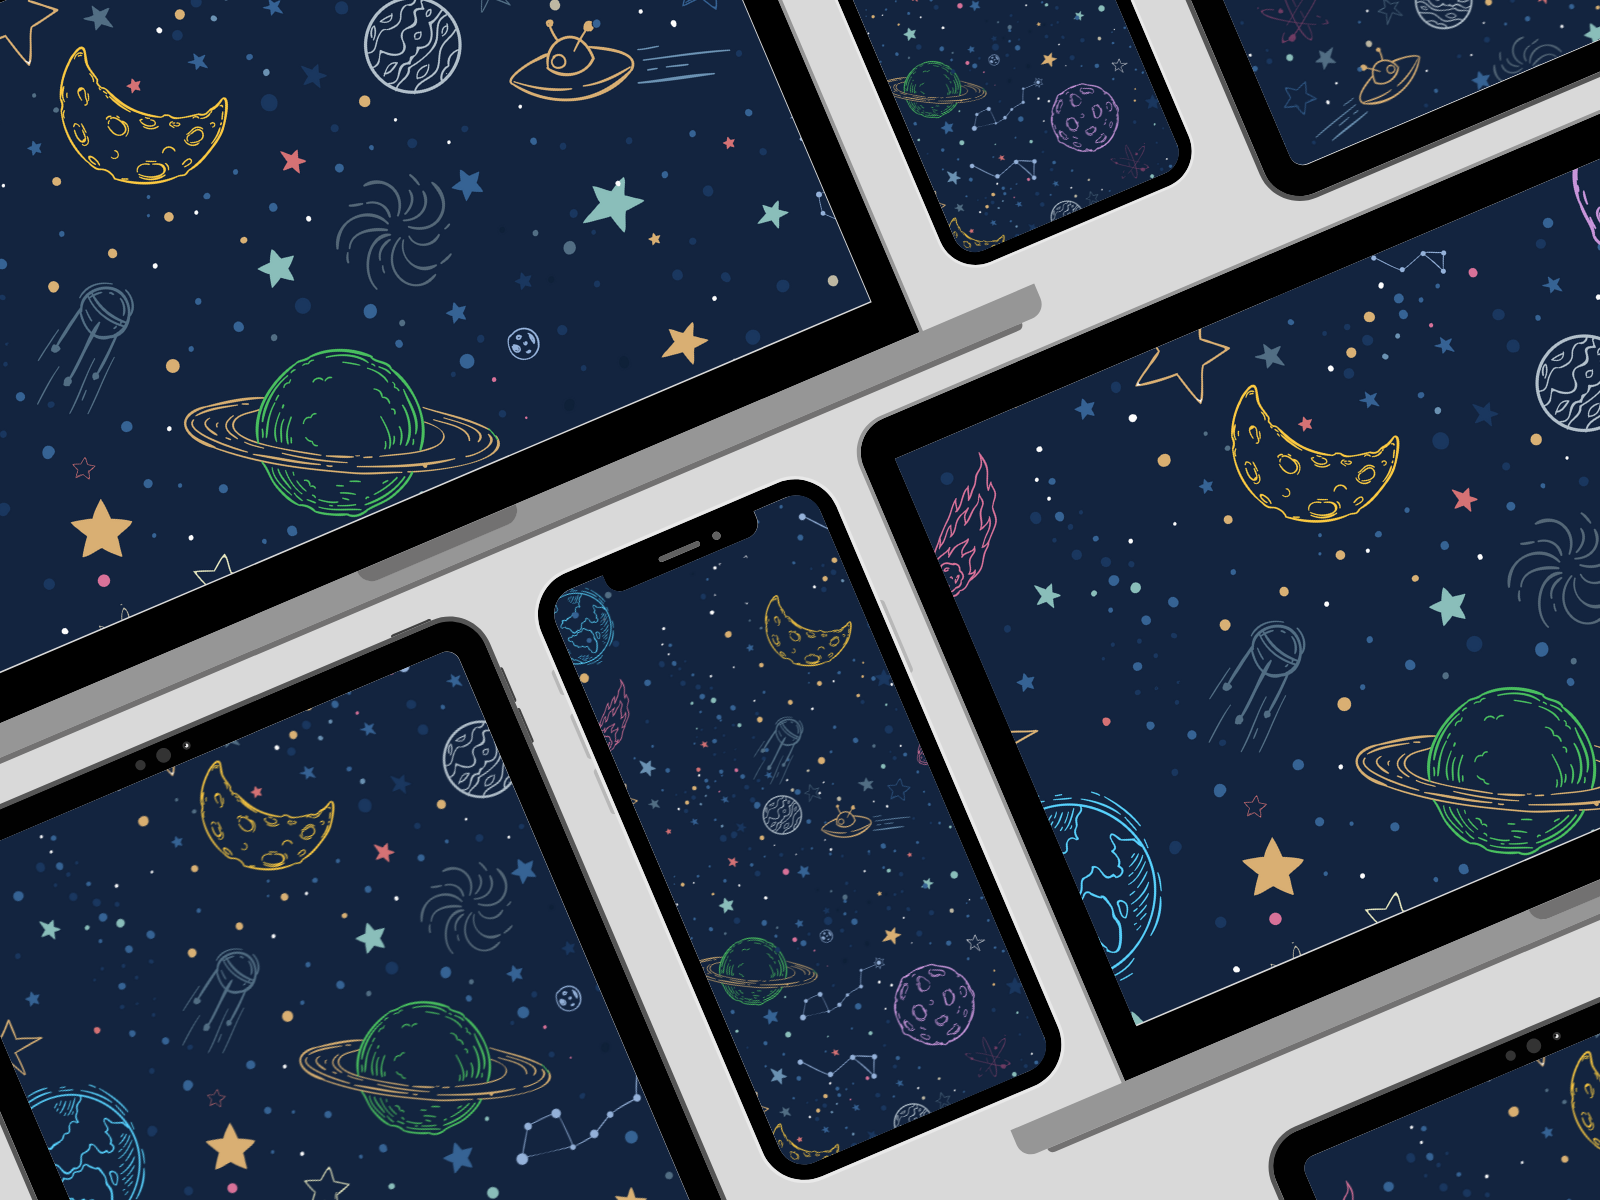 Download these Background Wallpaper 4K - Space Pattern theme for PCs, Phone, and Tablet.